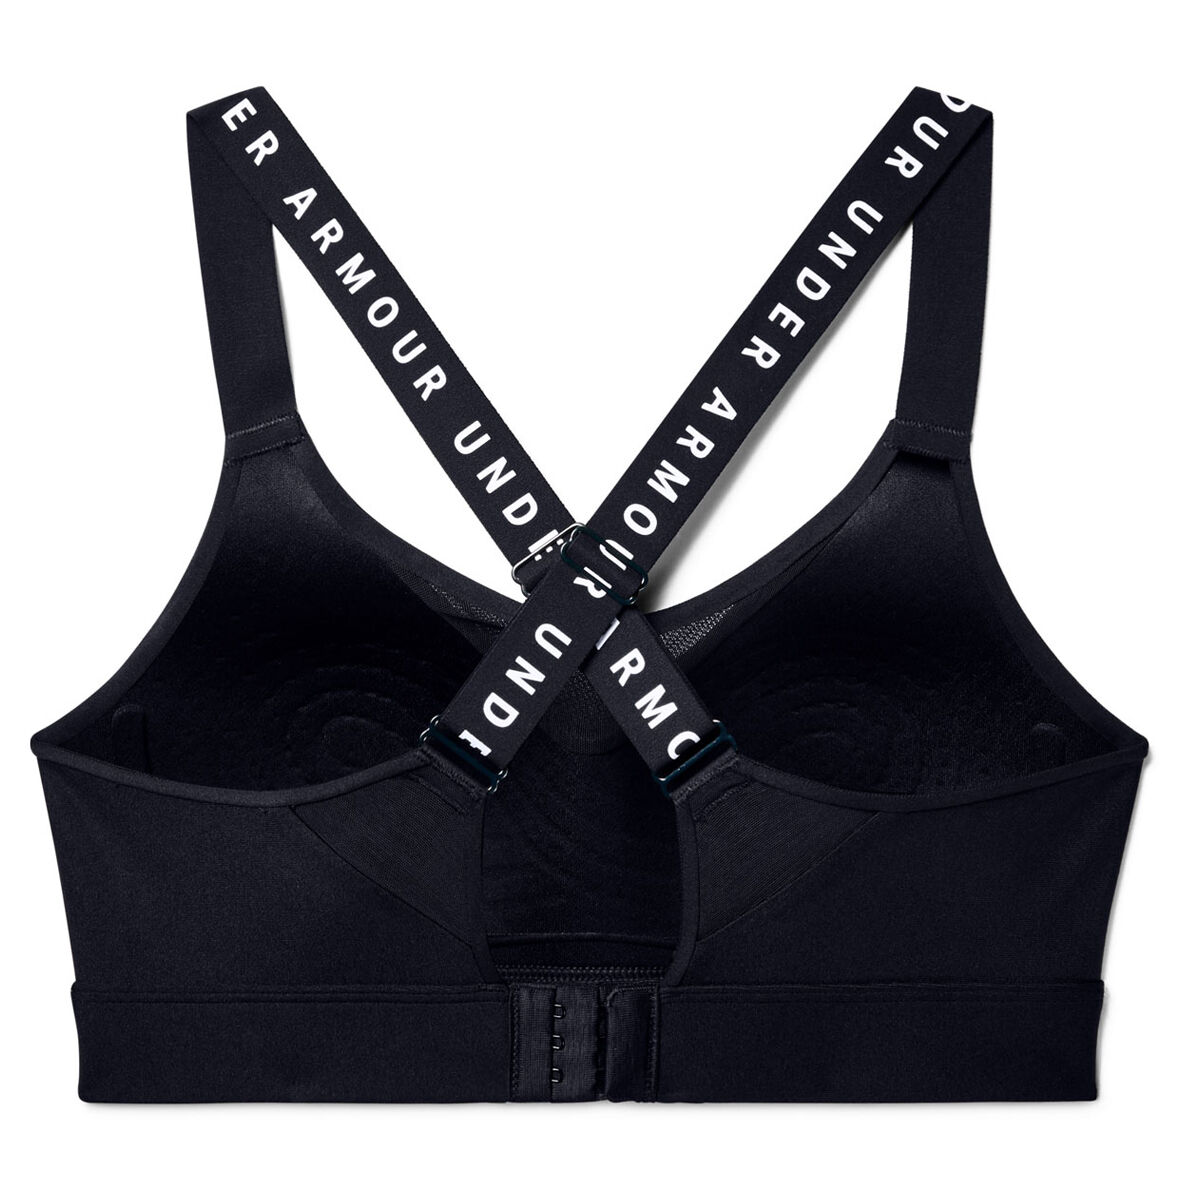 Under Armour Infinity High Support Bra Womens Black, £18.00